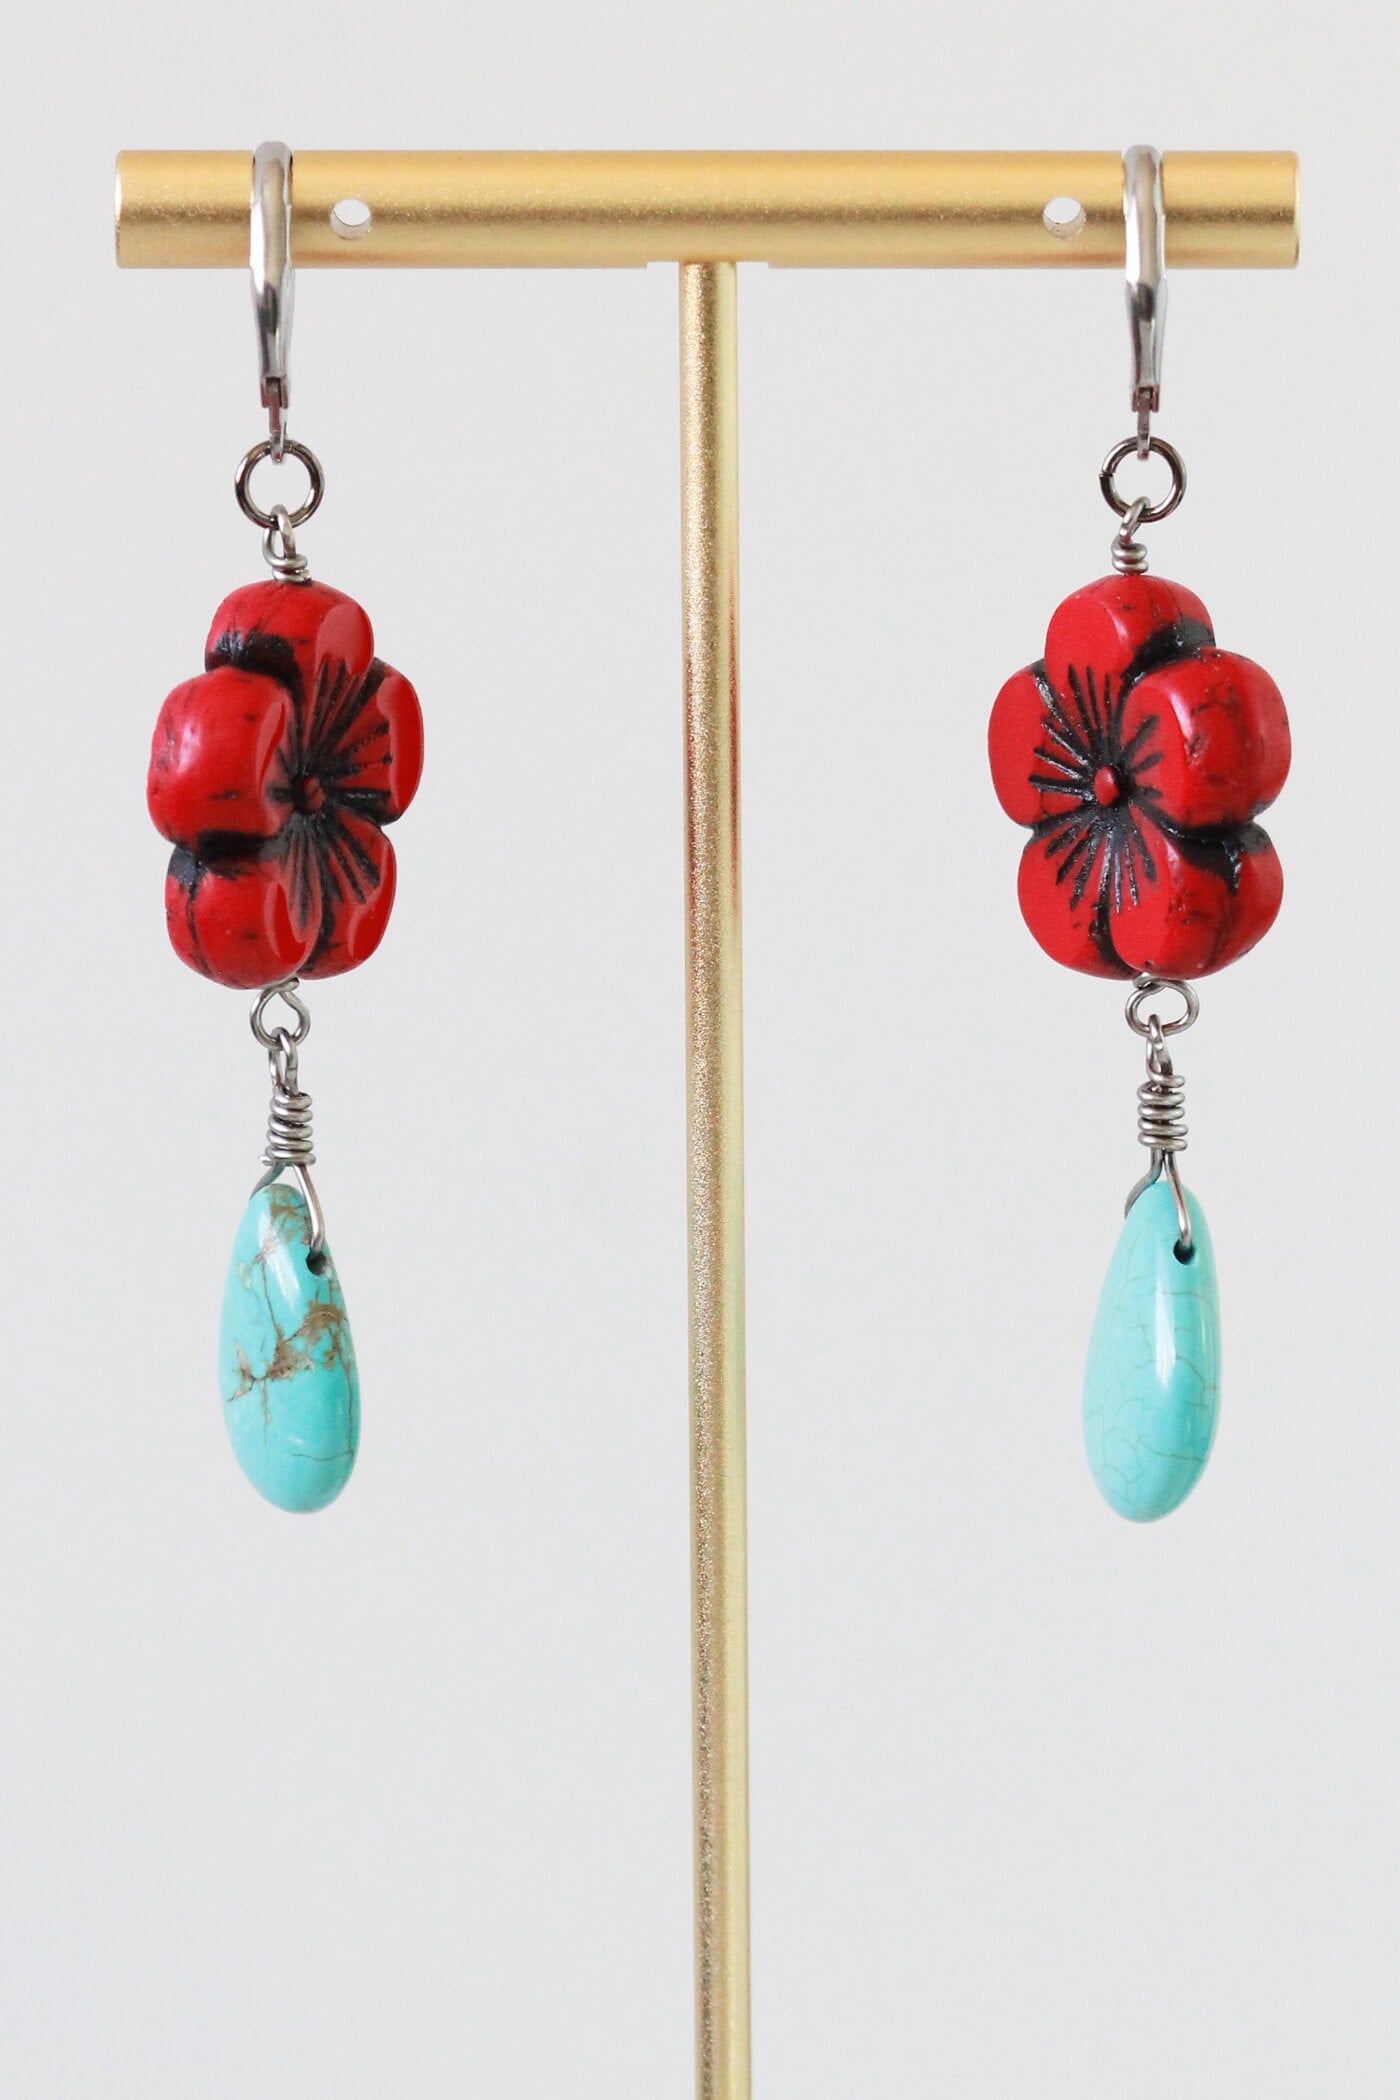 Dia De Los Muertos Jewelry - Red Flower Earrings by Kaleidoscopes And Polka Dots